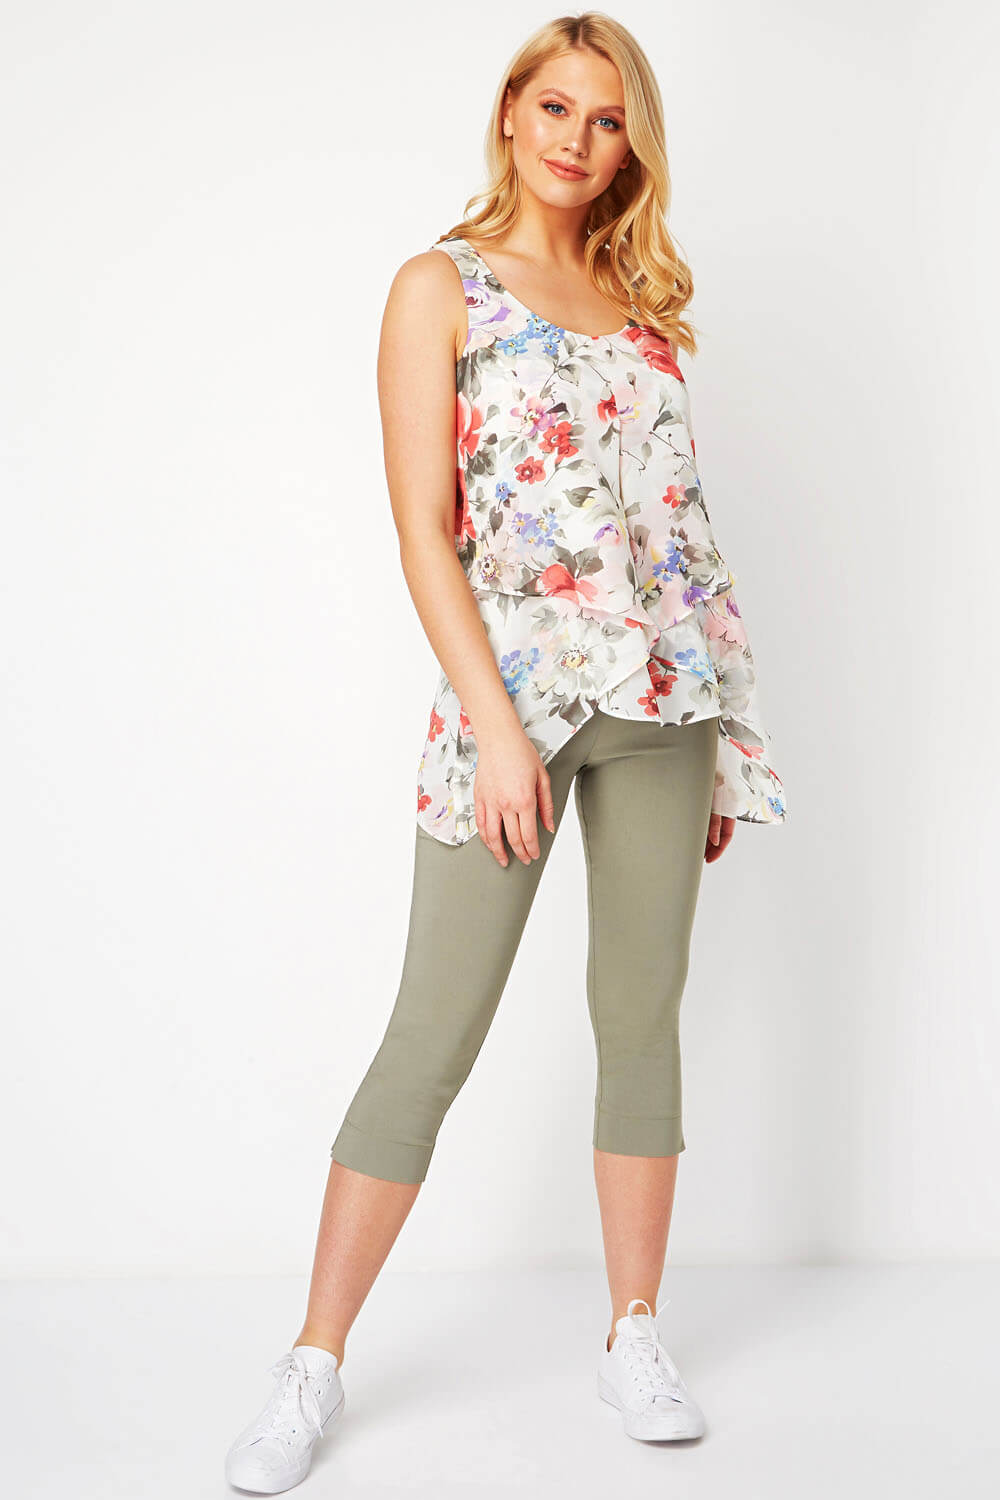 PINK Floral Print Asymmetric Top , Image 2 of 8